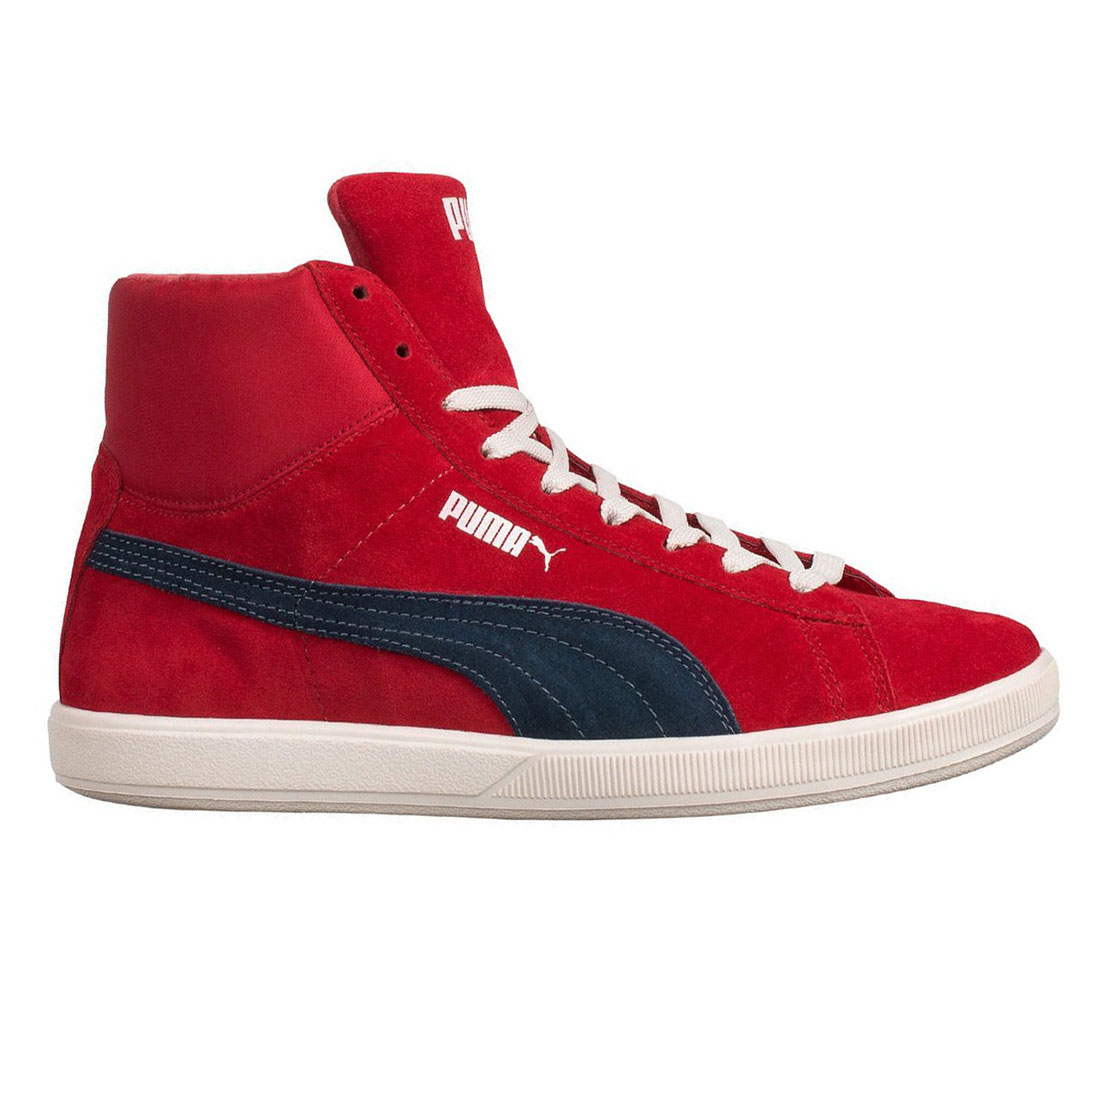 Puma Archive Lite Mid Suede red  356426-04